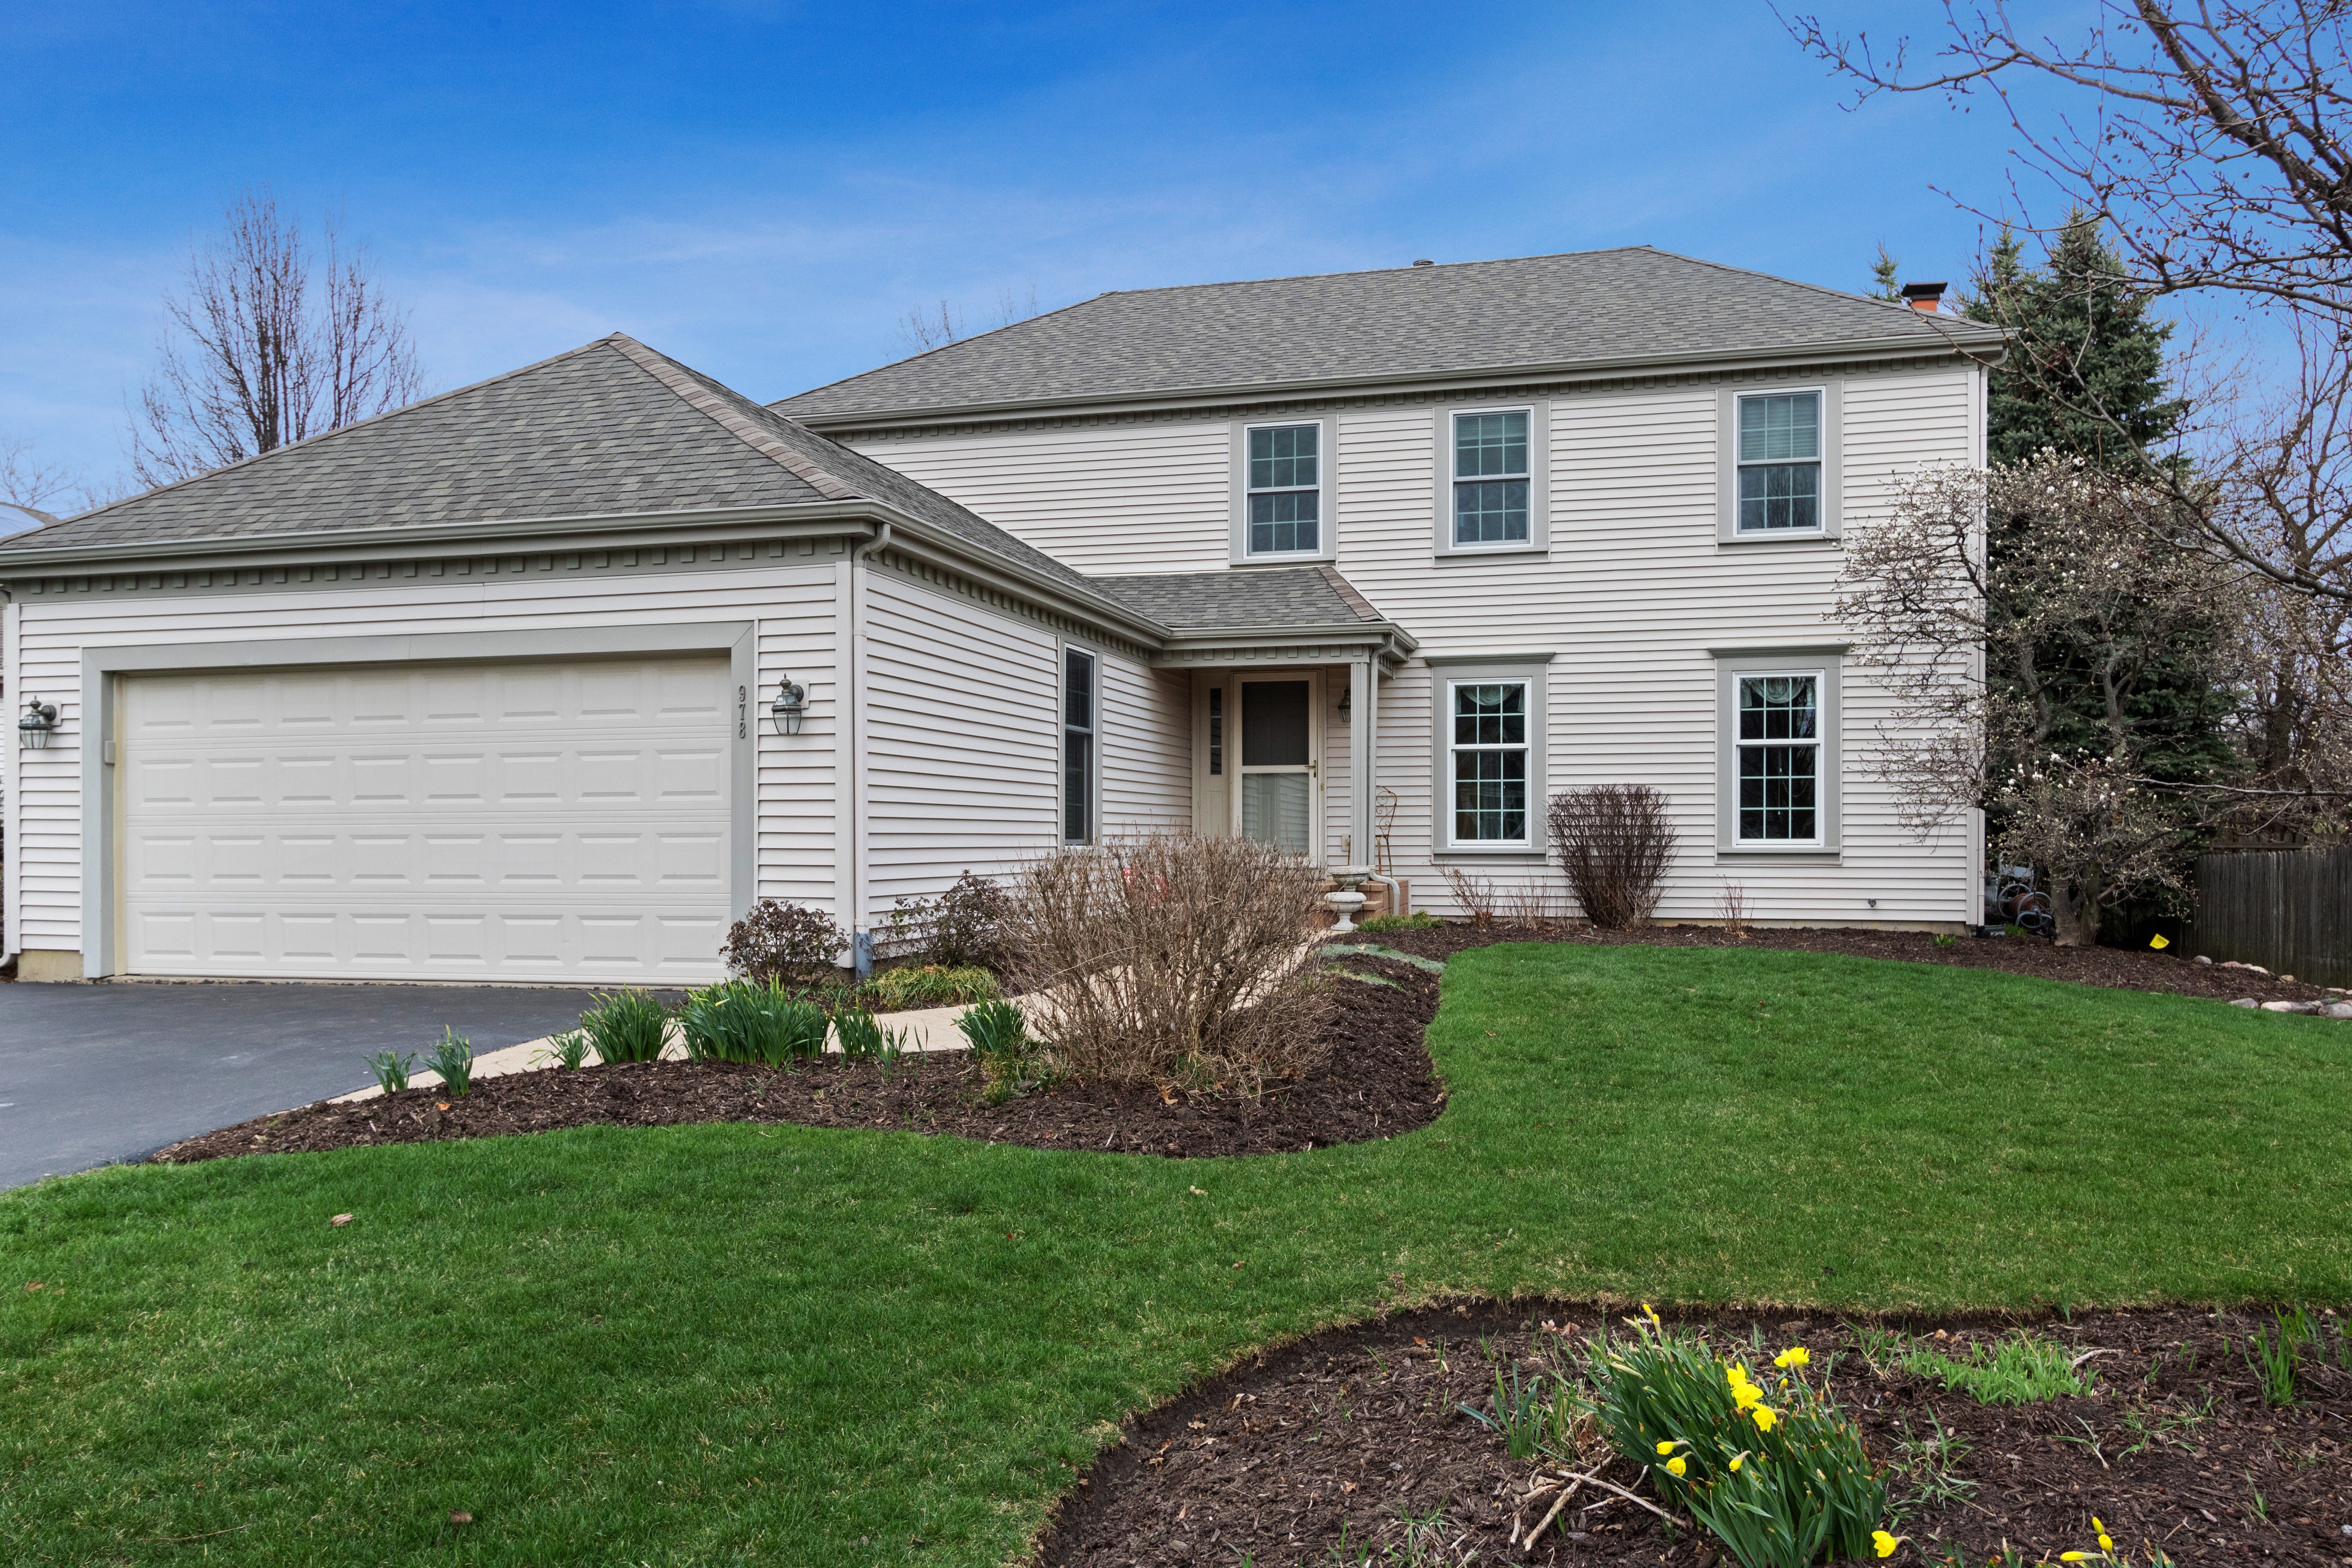 Sold a Single Family home in 2018 in Lake Zurich, IL